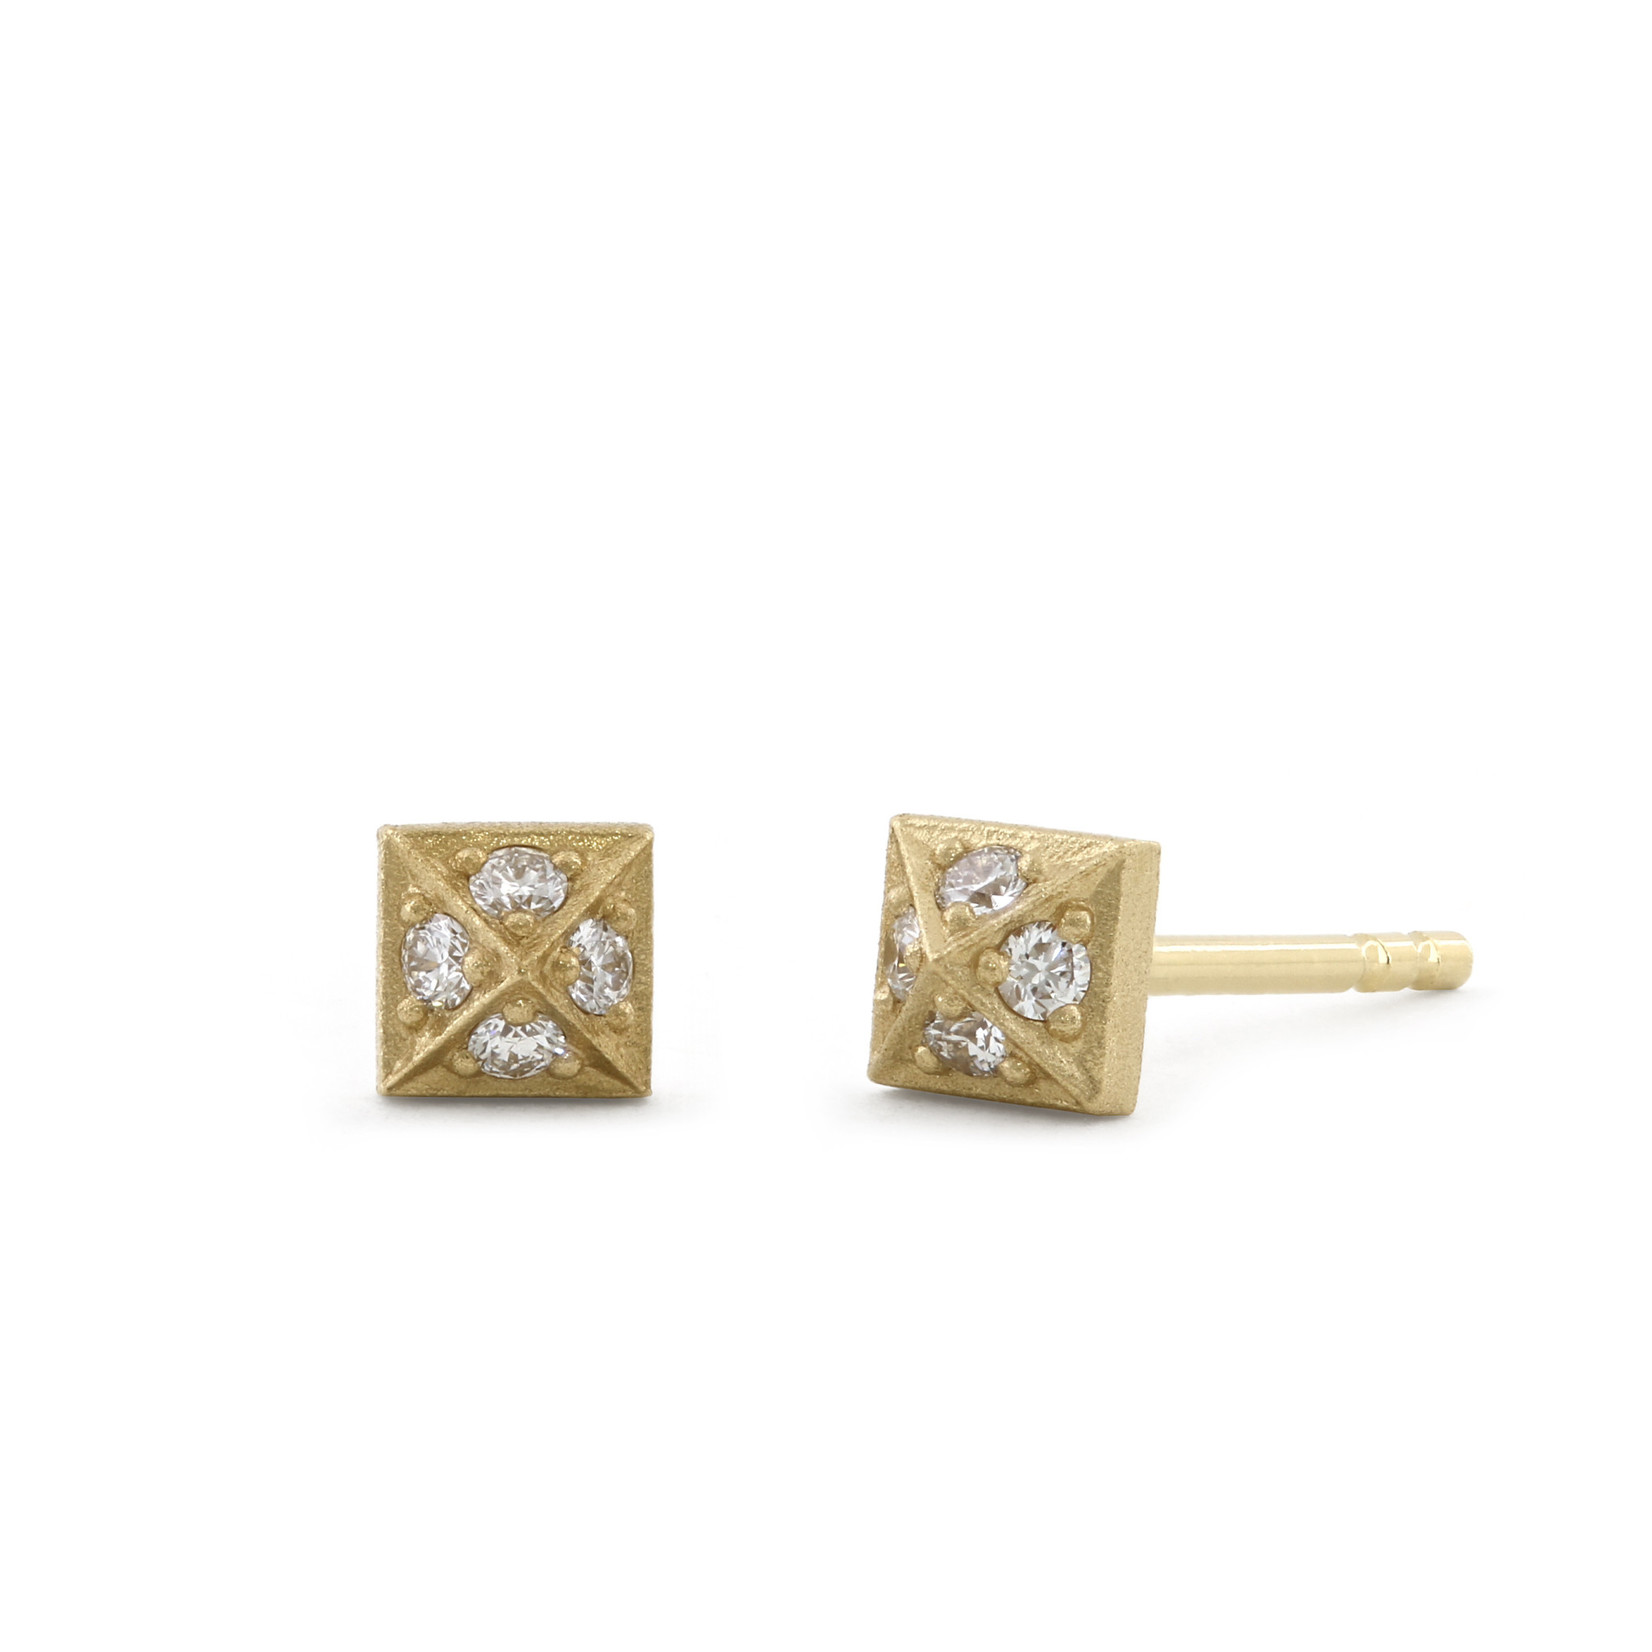 Parts of Four crystal-pyramid stud earring - Gold